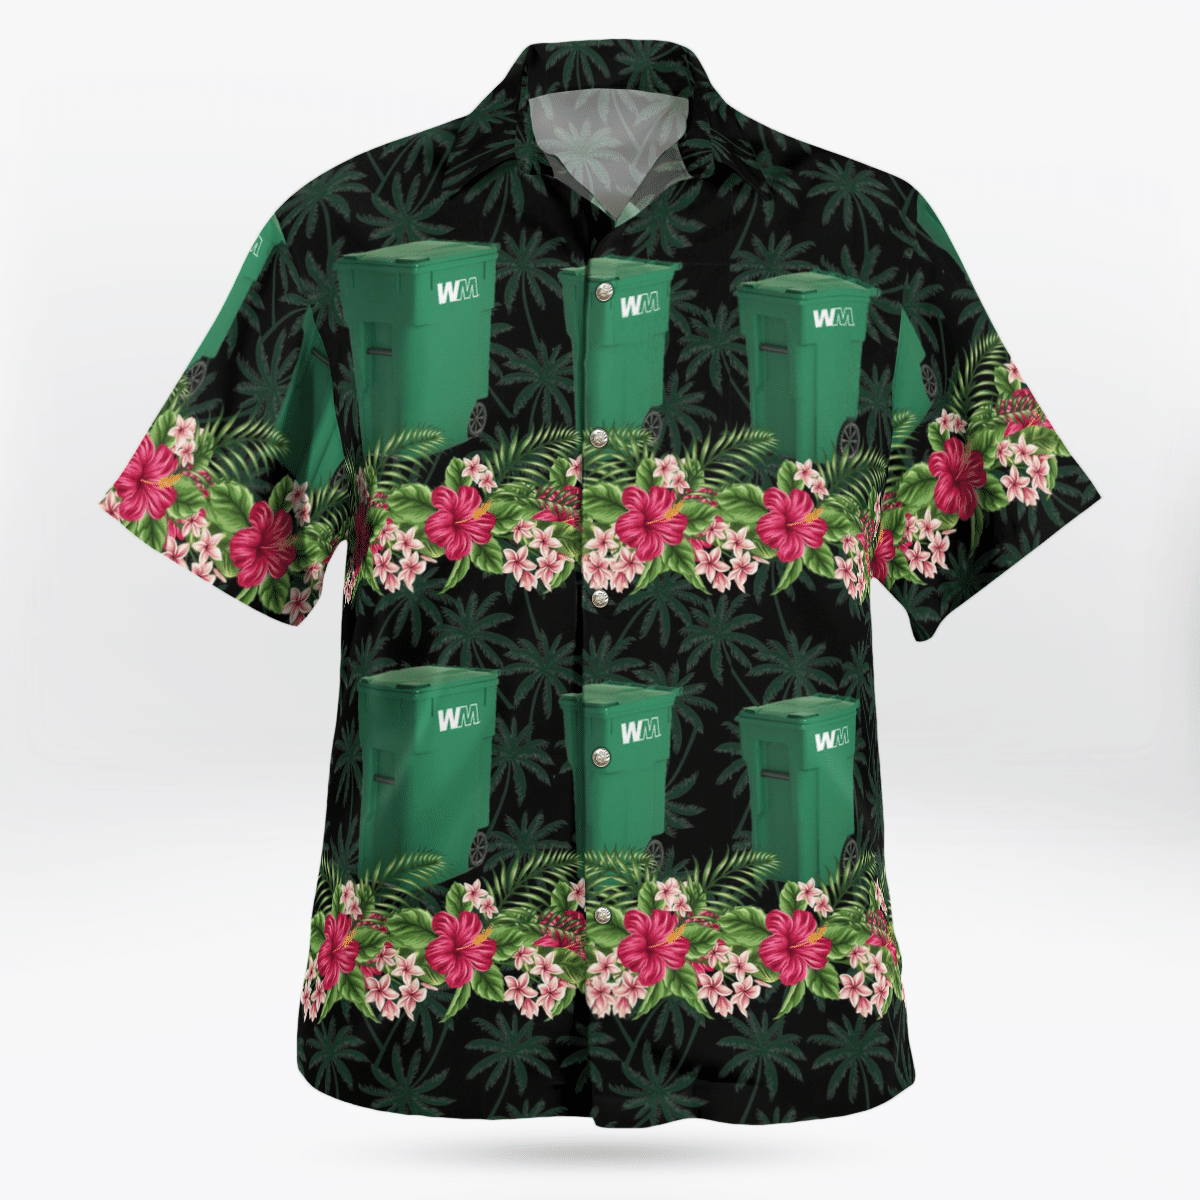 COOL Waste Management Gallon Trash Container 3D Hawaii Shirt2